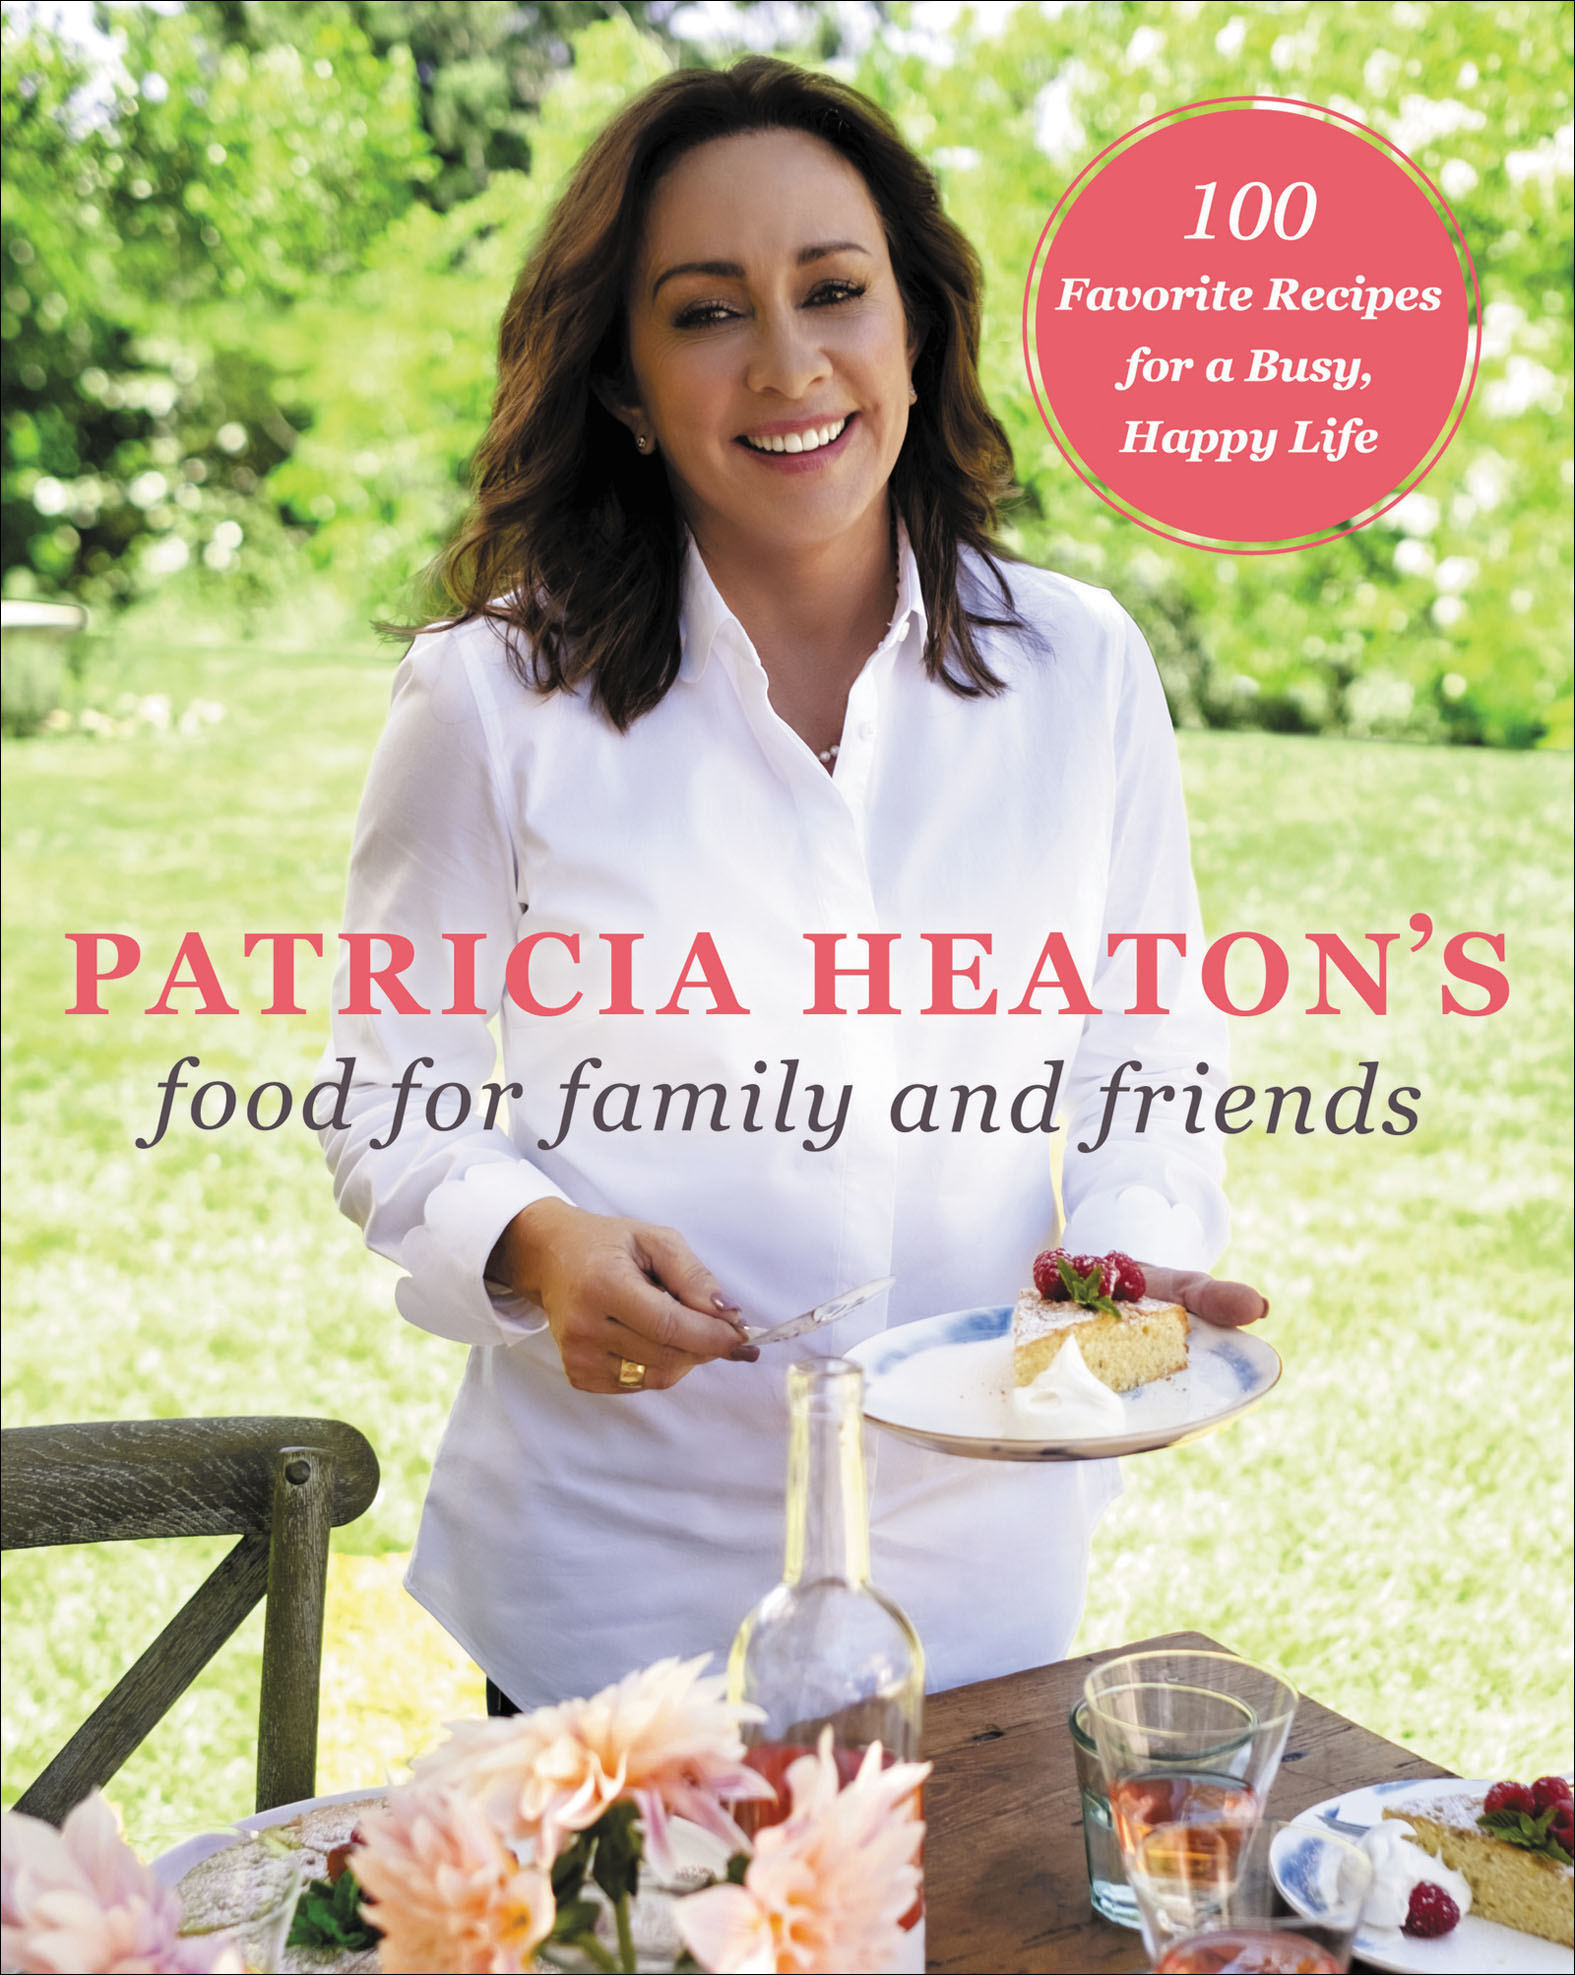 Umschlagbild für Patricia Heaton's Food for Family and Friends [electronic resource] : 100 Favorite Recipes for a Busy, Happy Life